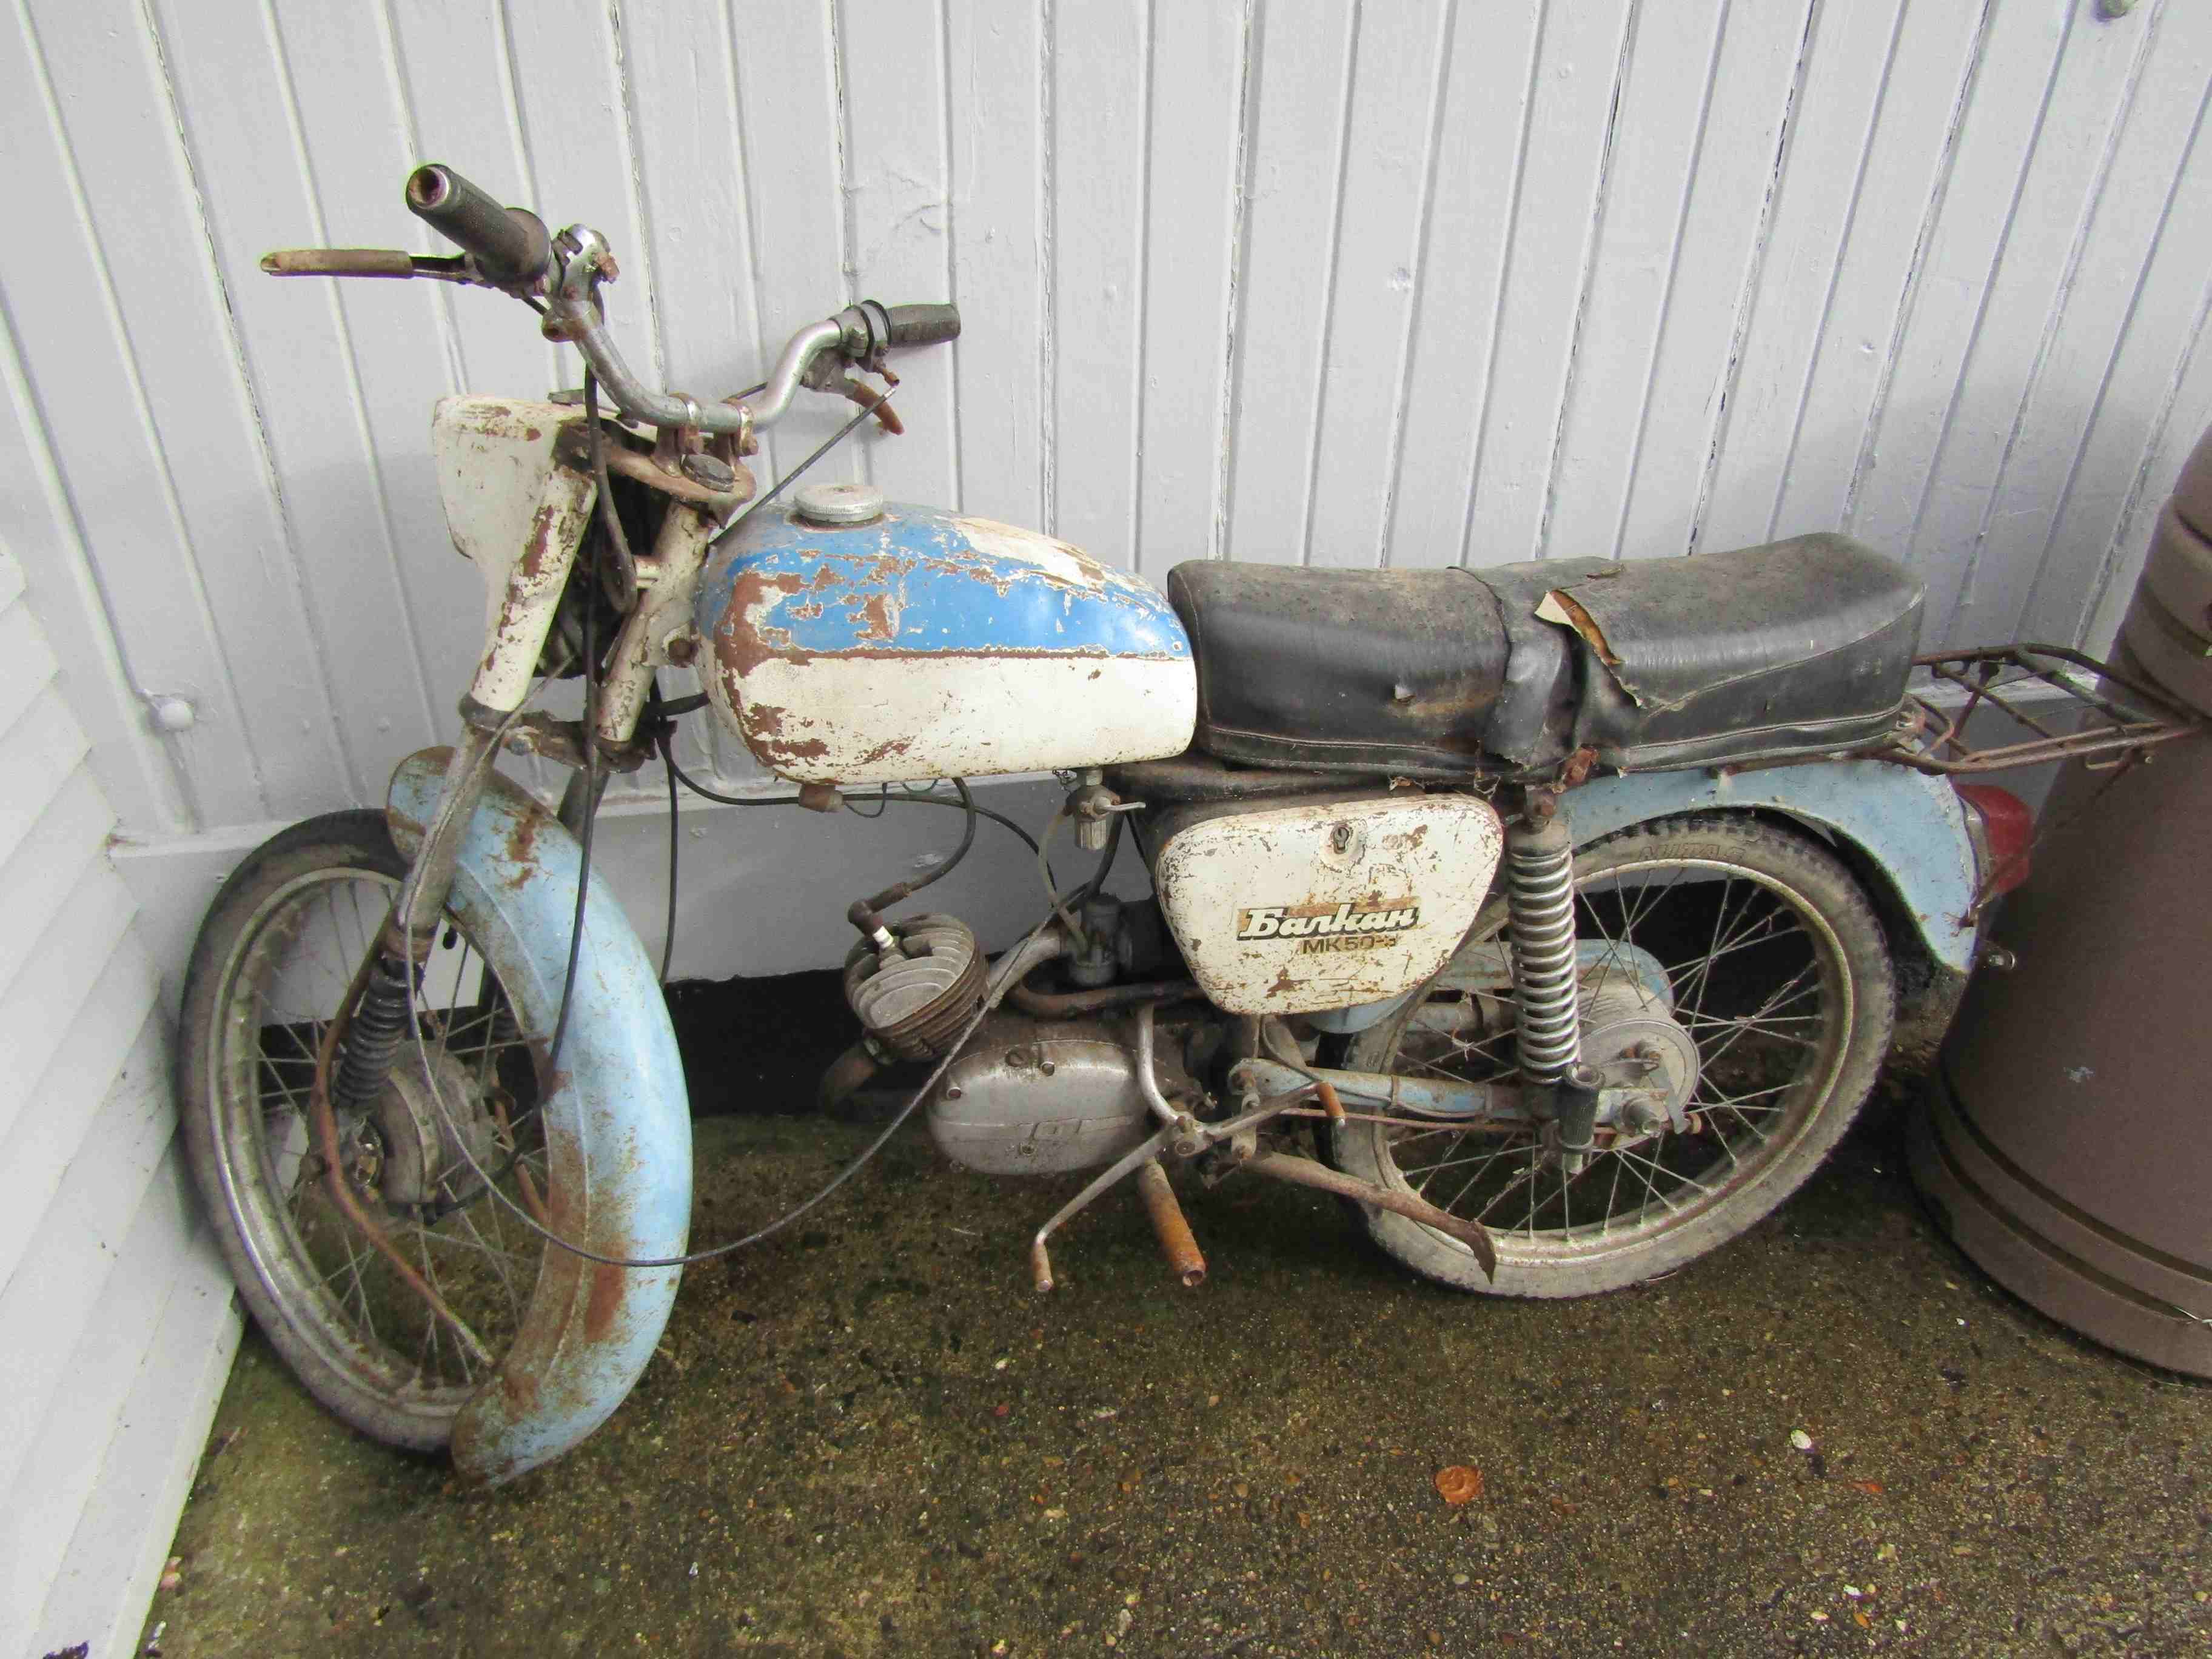 A motorcycle ideal for restoration.